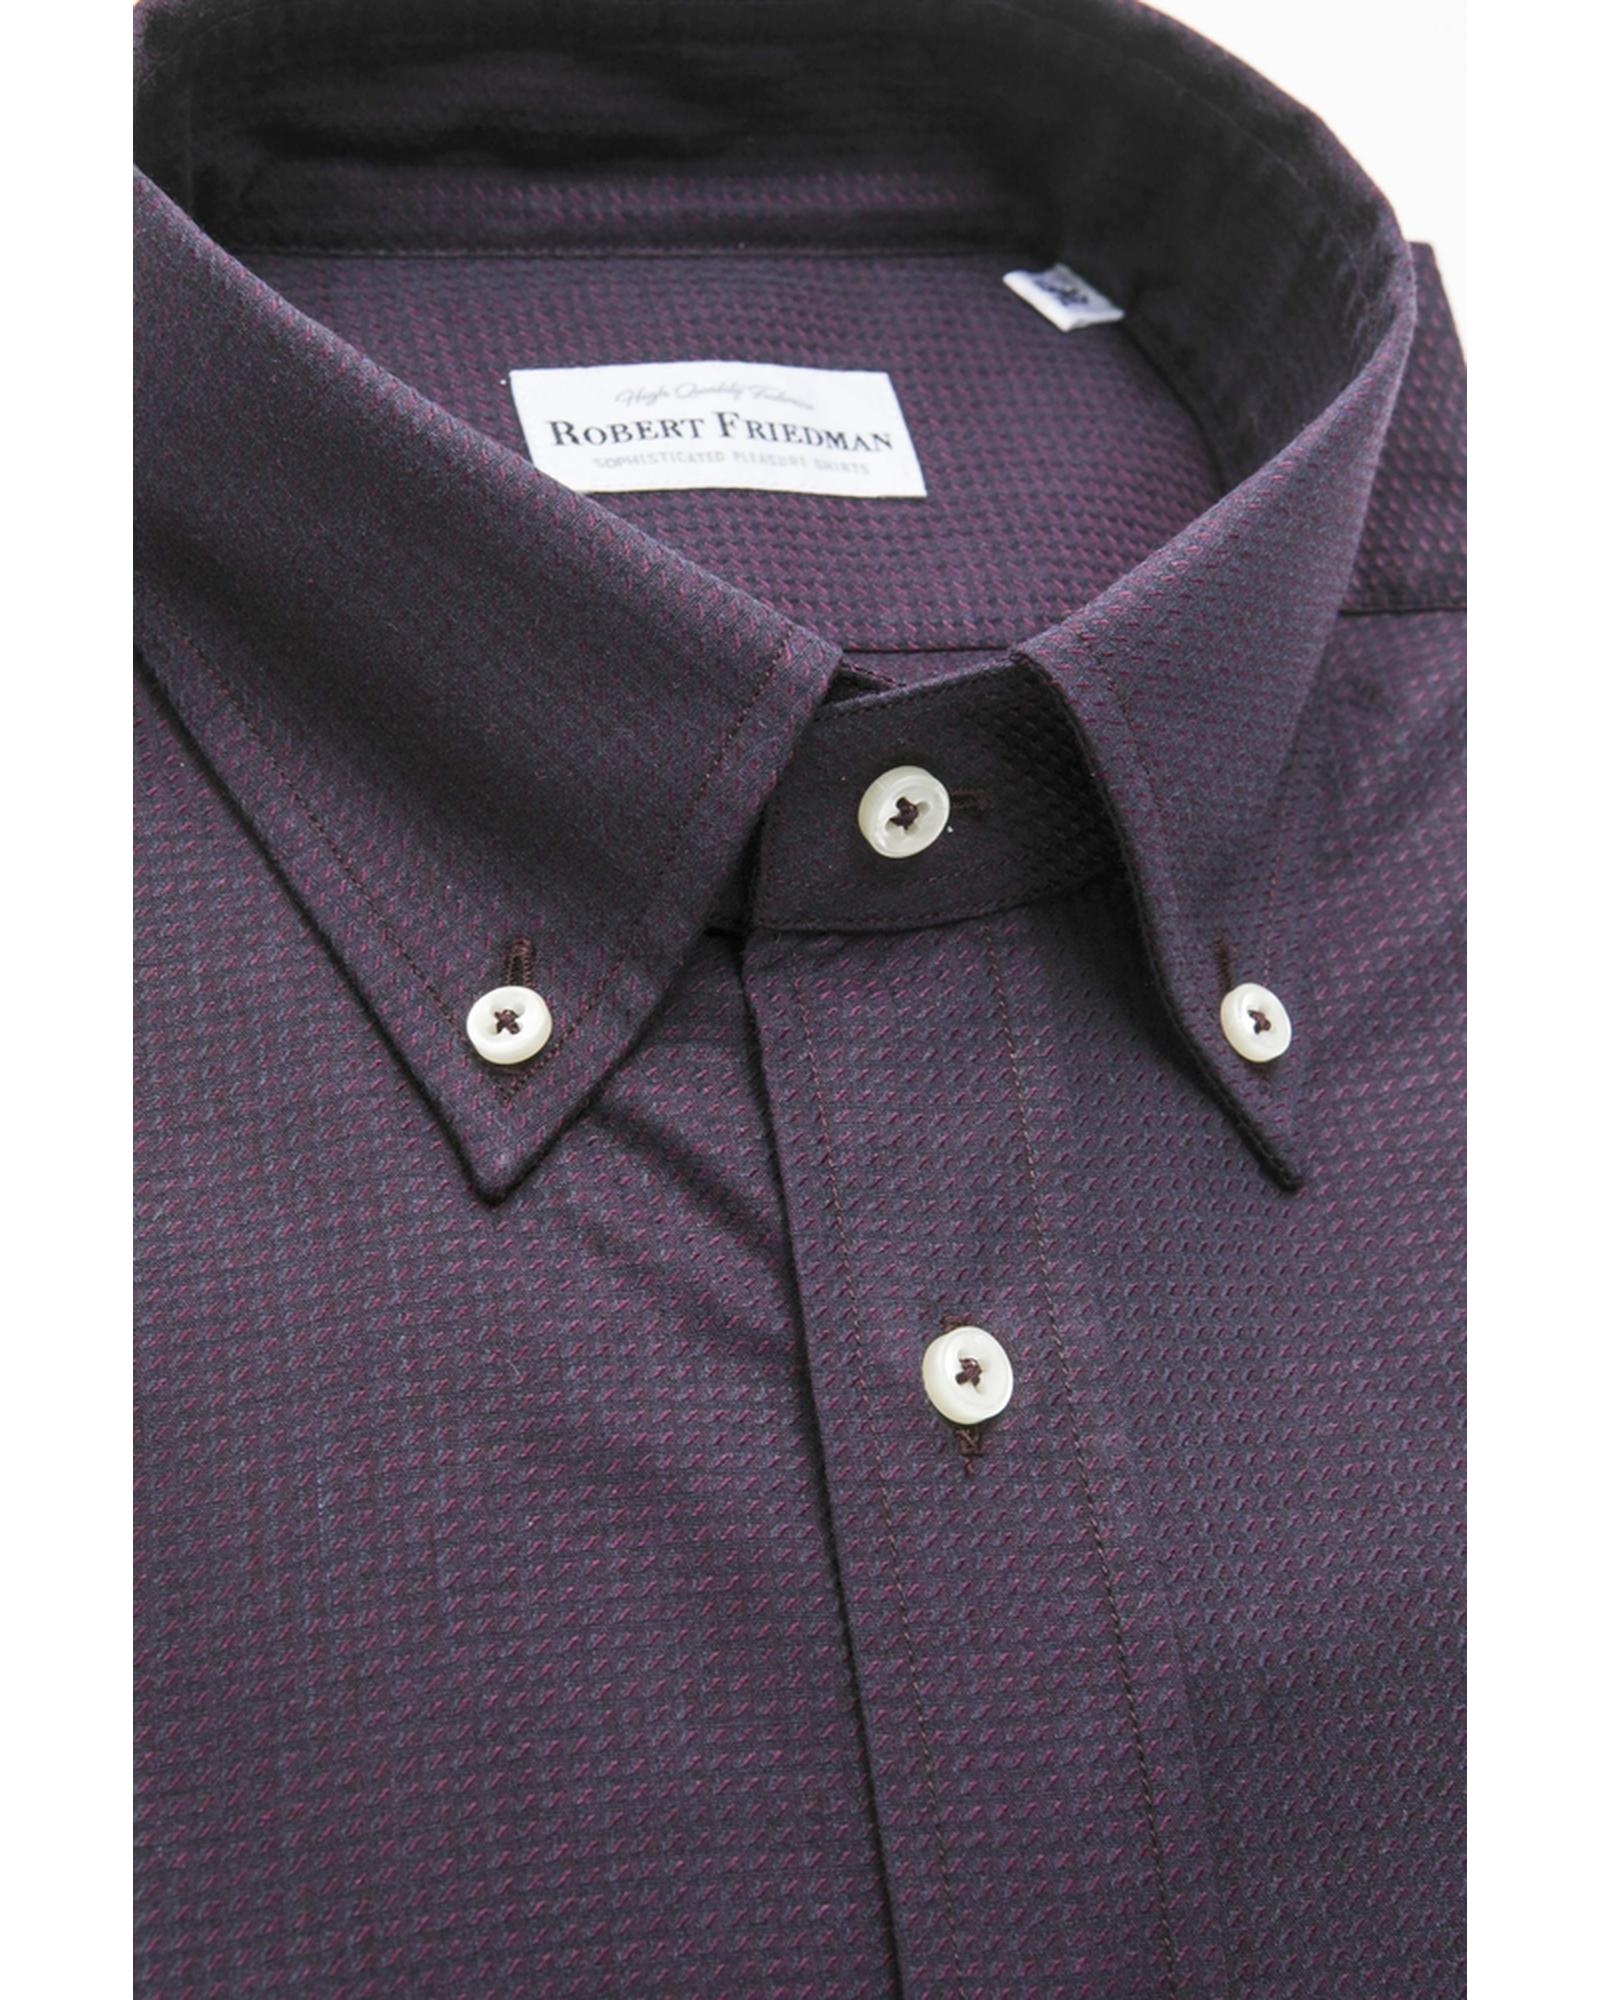 Classic Button Down Shirt for Effortless Style 41 IT Men